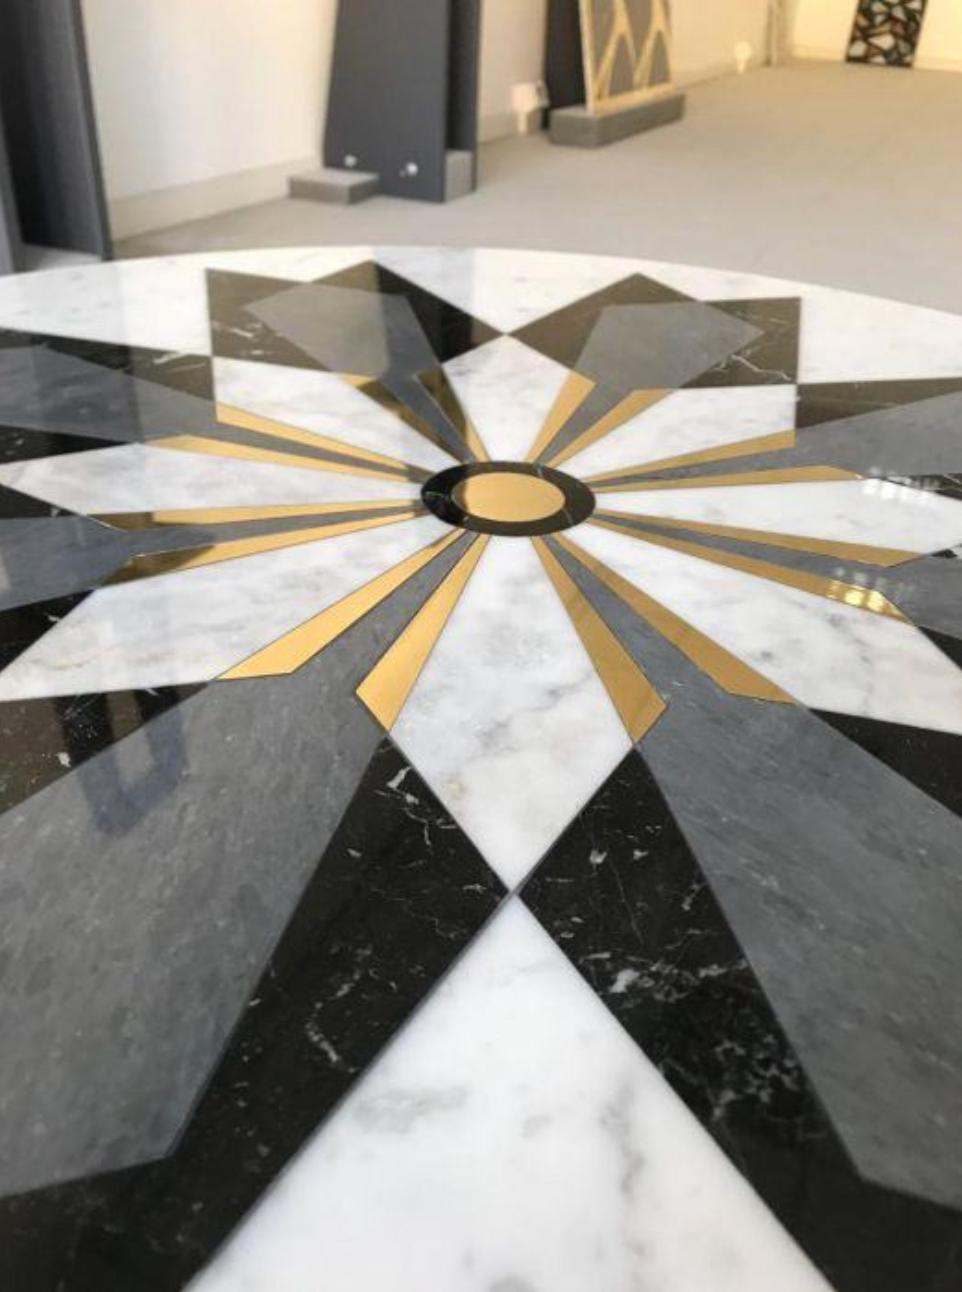 This diamond inlay table is designed by Davide Silvestri of Carrara, Italy. 

The materials used for this particular edition of 30 include white Carrara marble, Nero Marquina, grey Imperiale marble and brass inlays. Base material and dimensions can